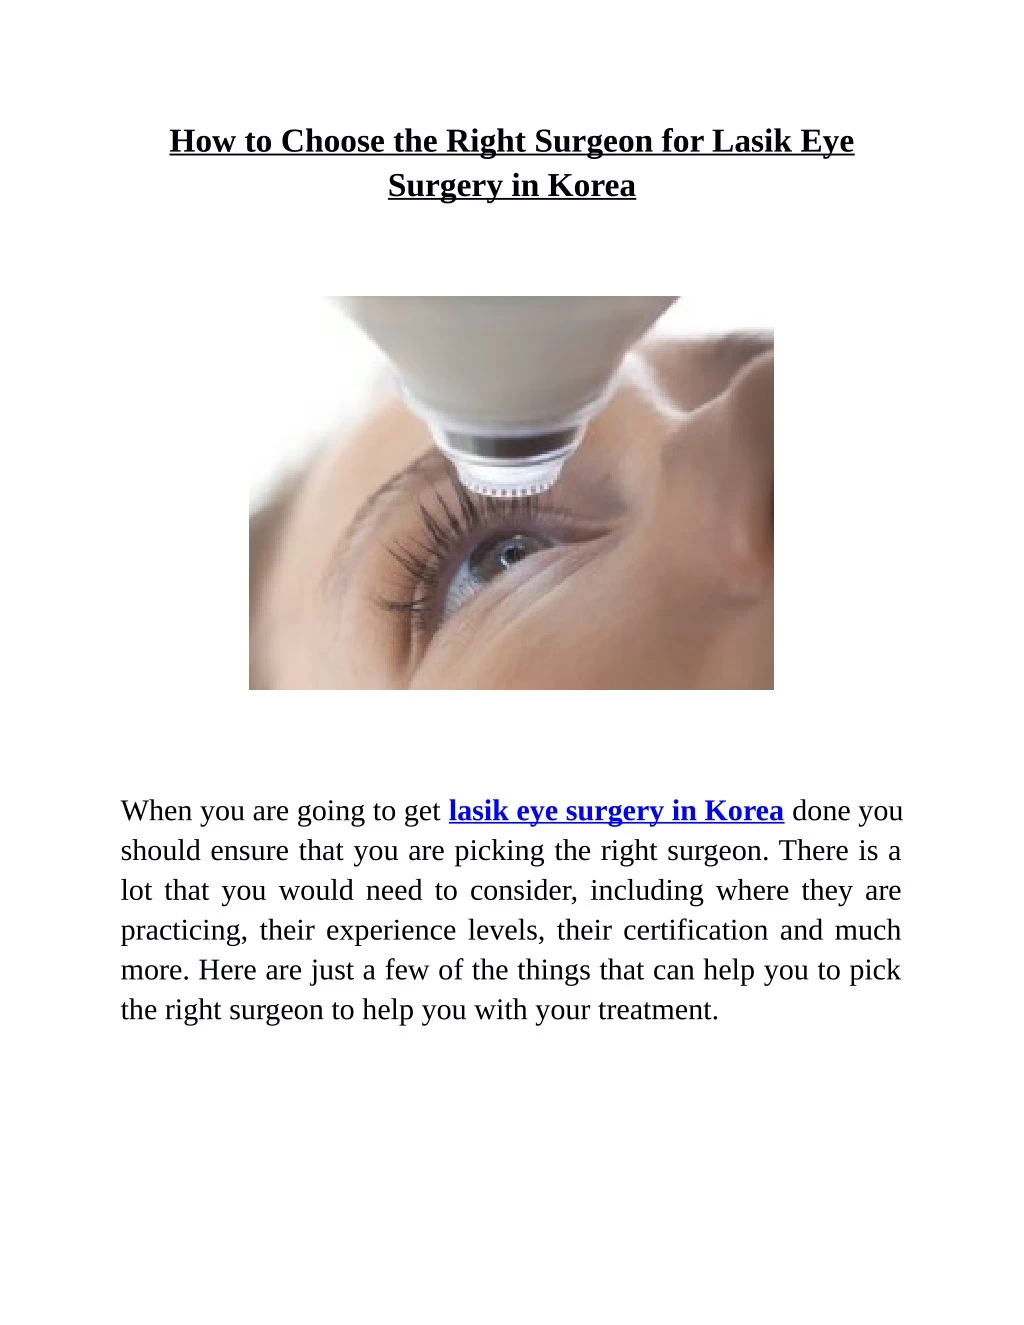 how to choose the right surgeon for lasik